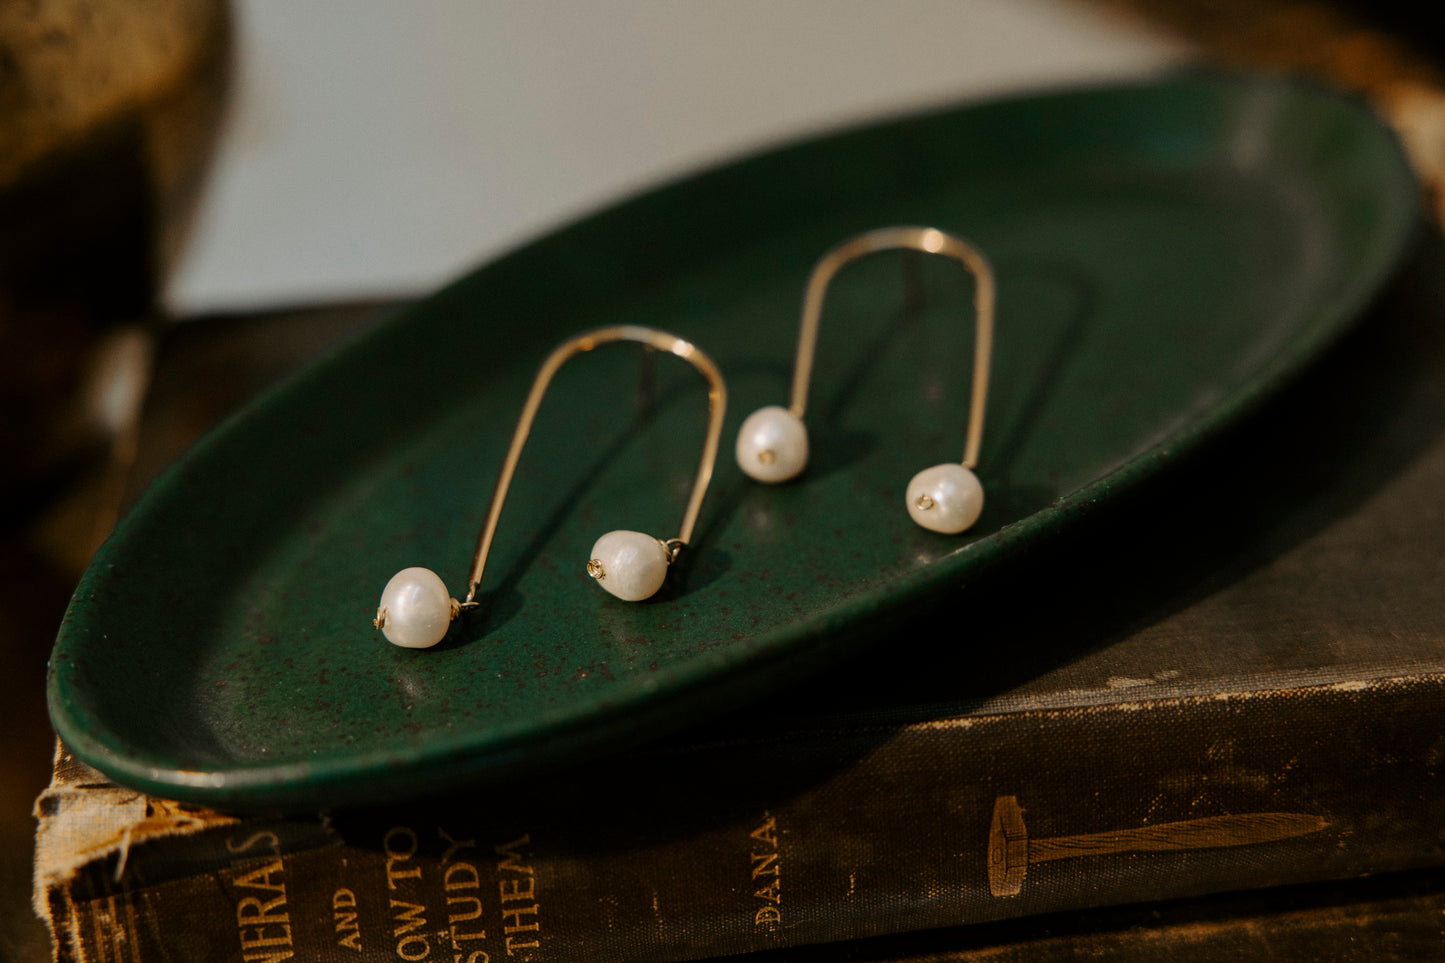 Pearl Party Earrings- 14k Gold Filled